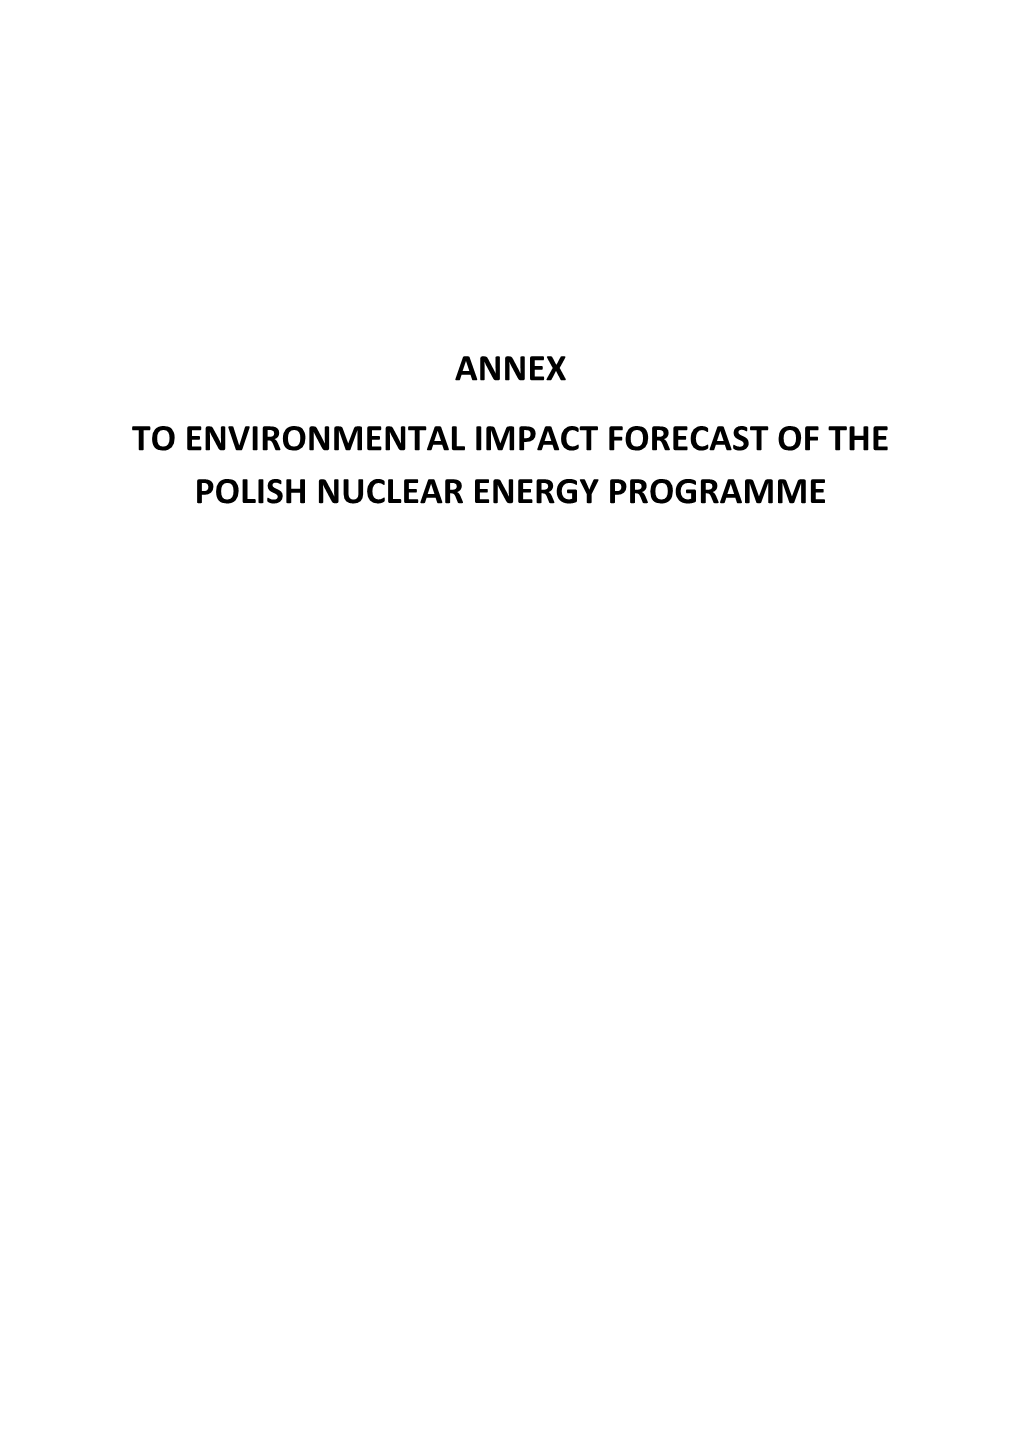 Annex to Environmental Impact Forecast of the Polish Nuclear Energy Programme